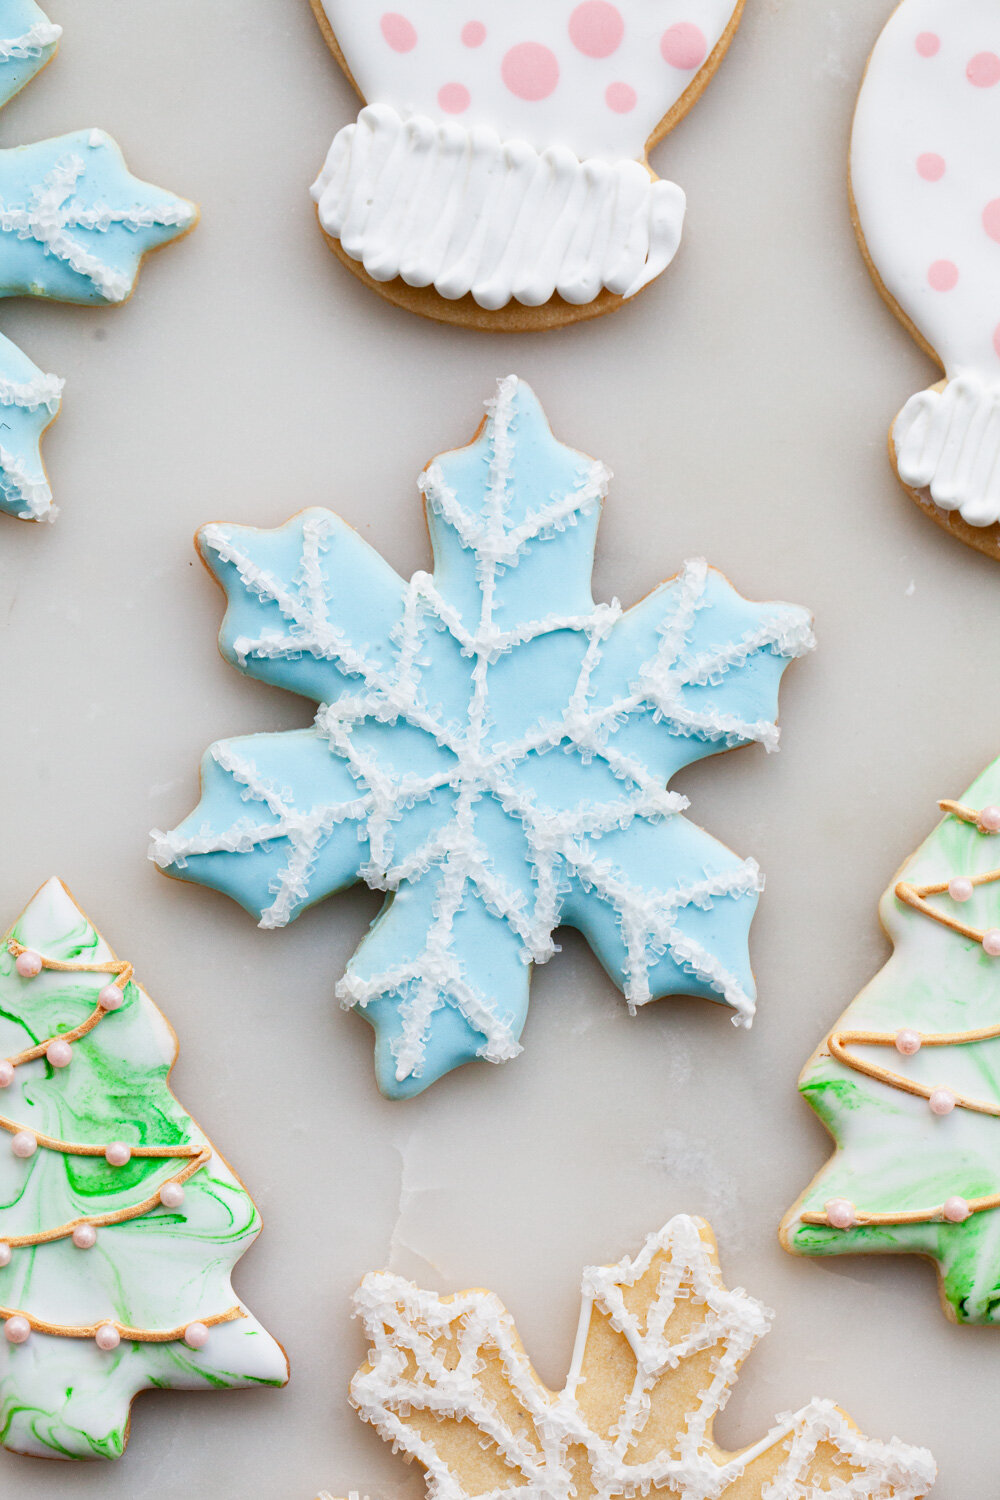 How to decorate Christmas cookies with royal icing